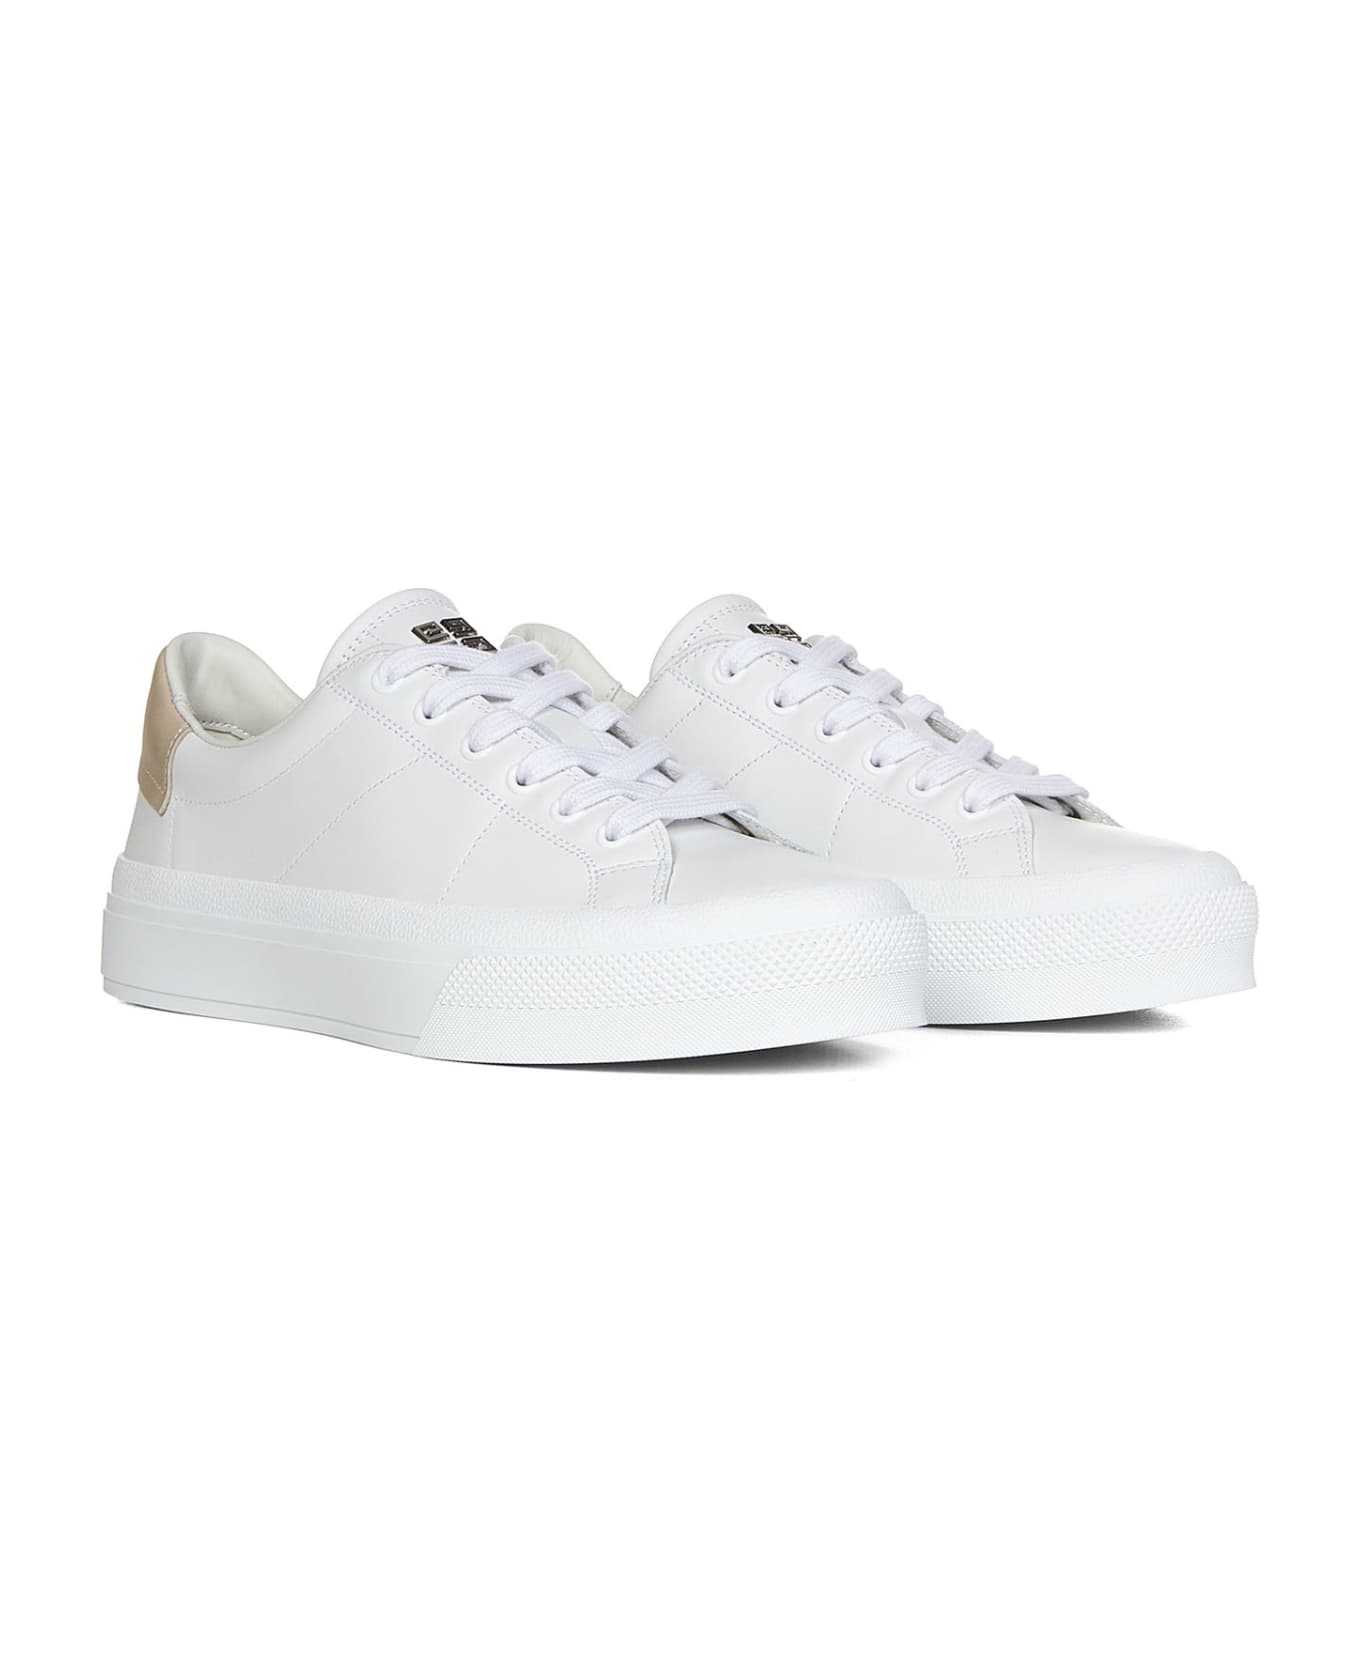 Givenchy City Sneakers - Bianco